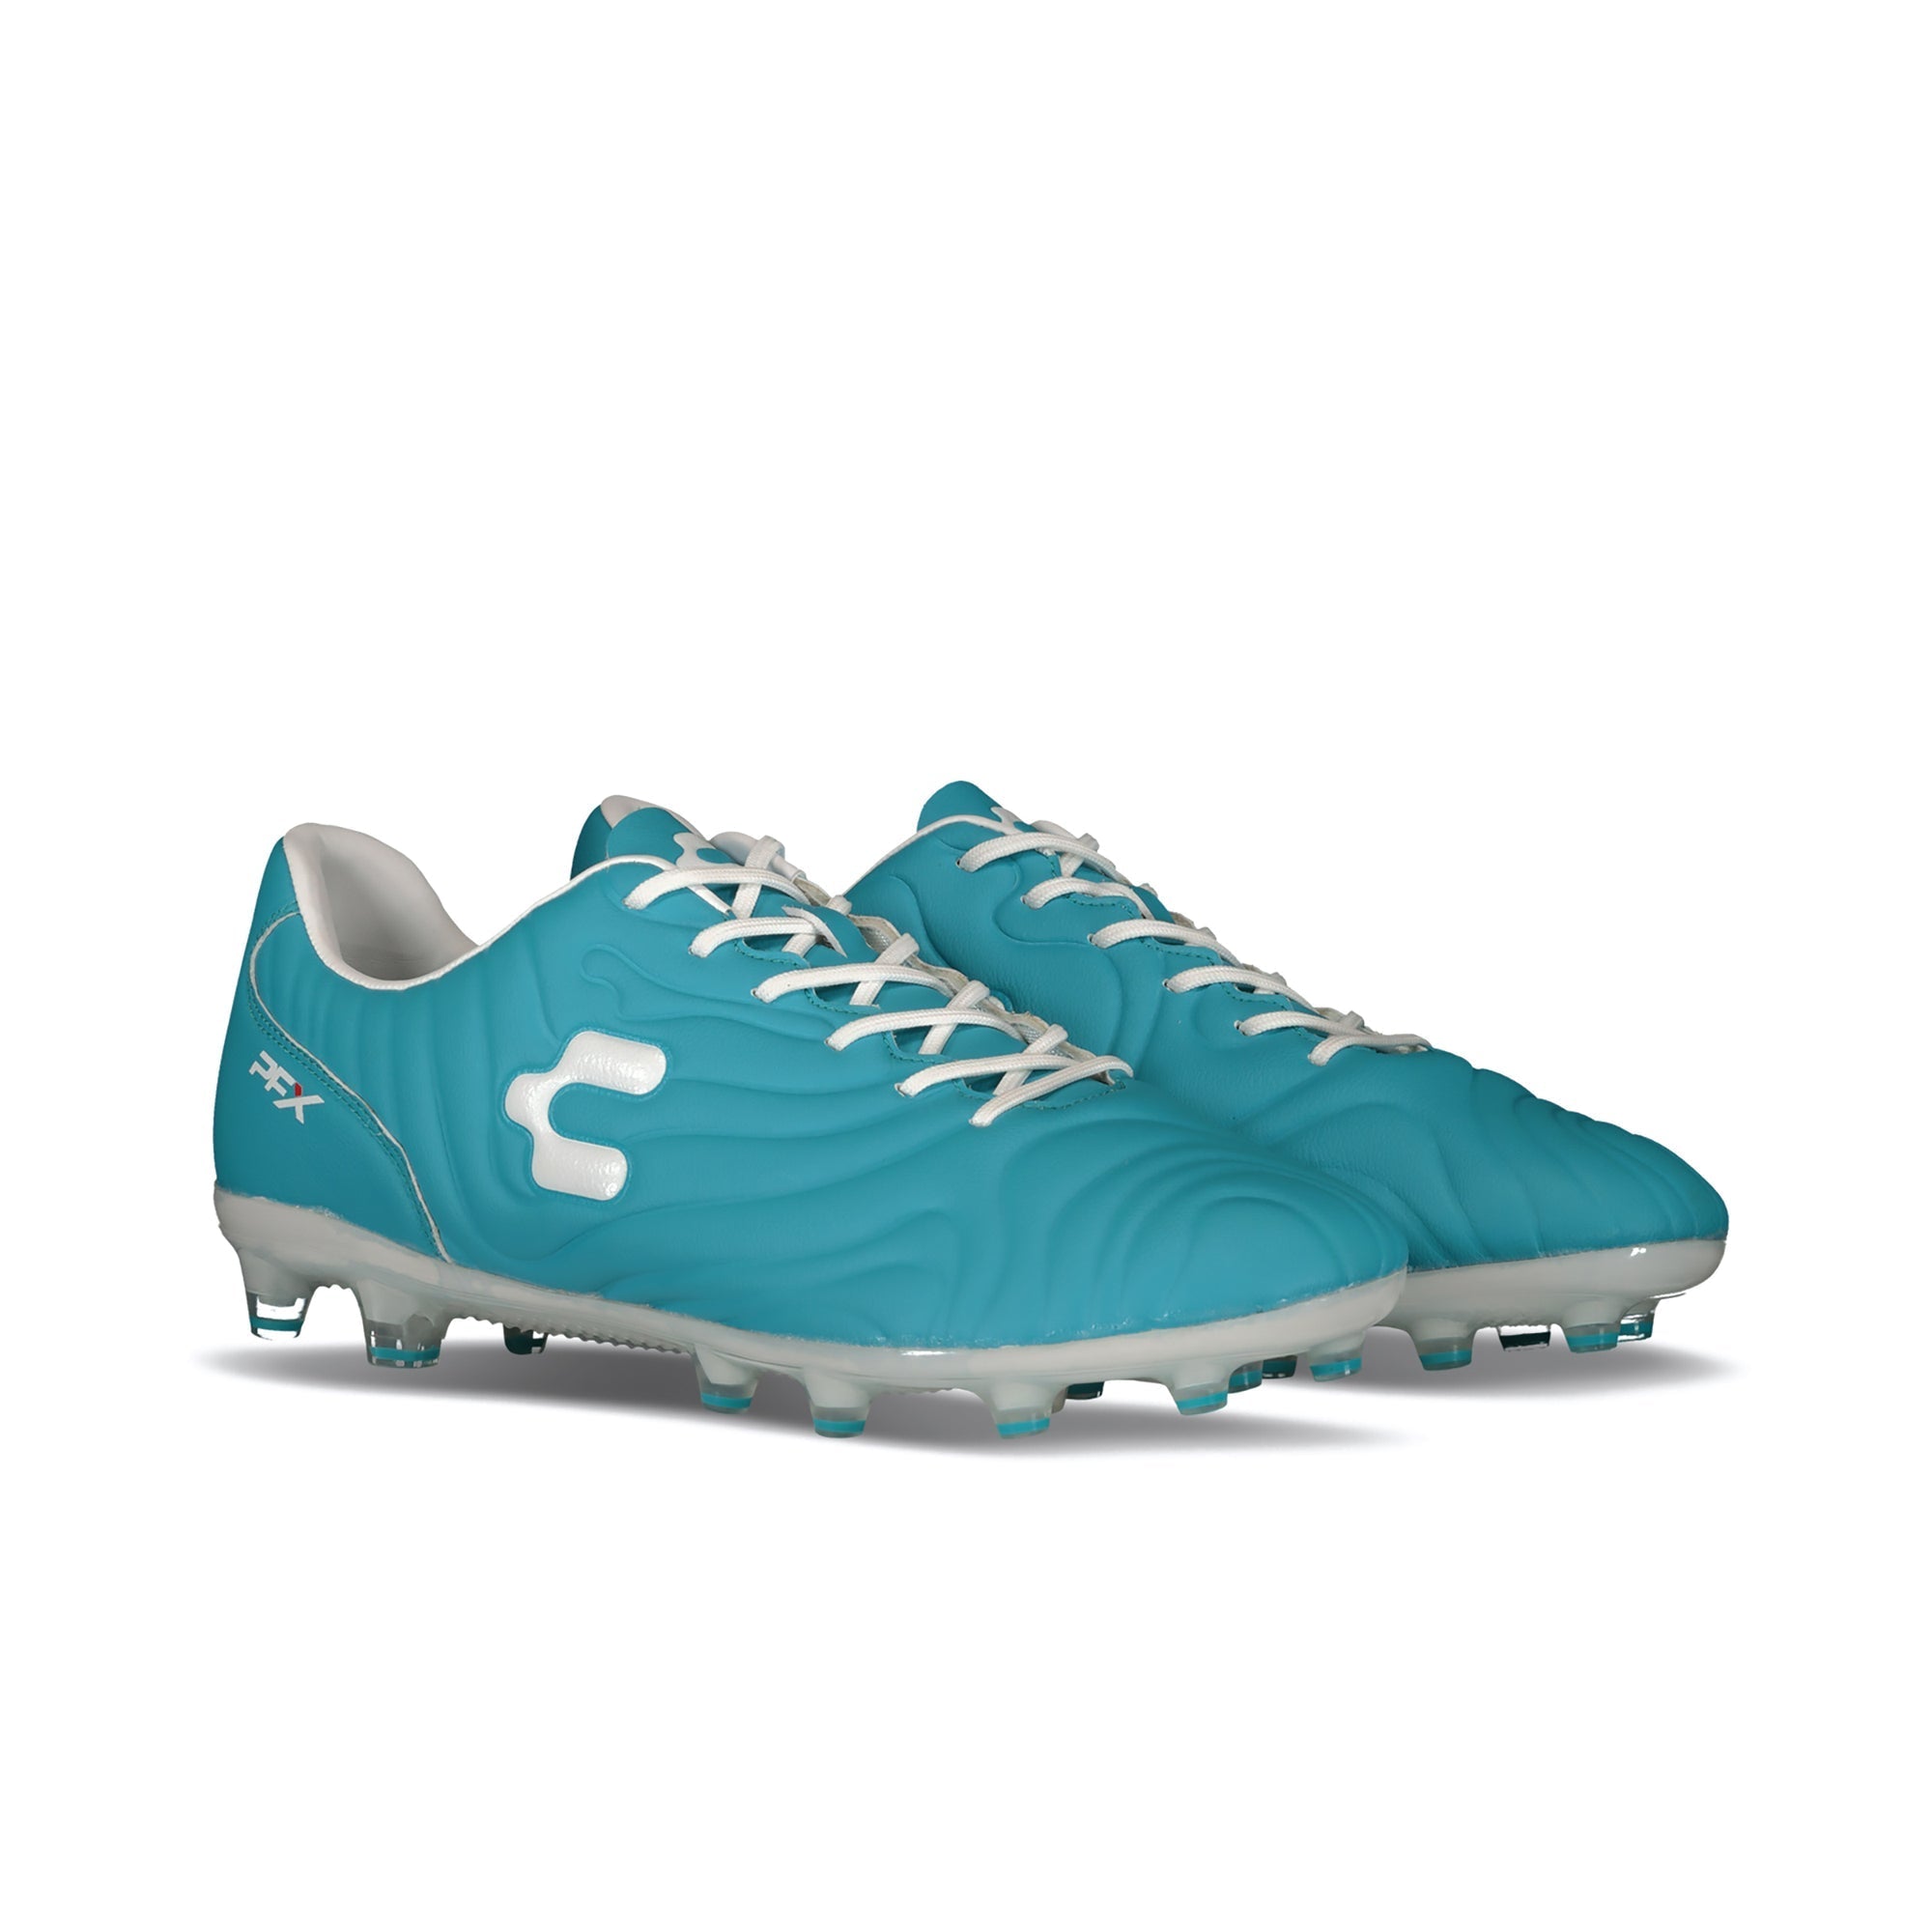 Charly Storm FG Soccer Cleats Turquoise/White